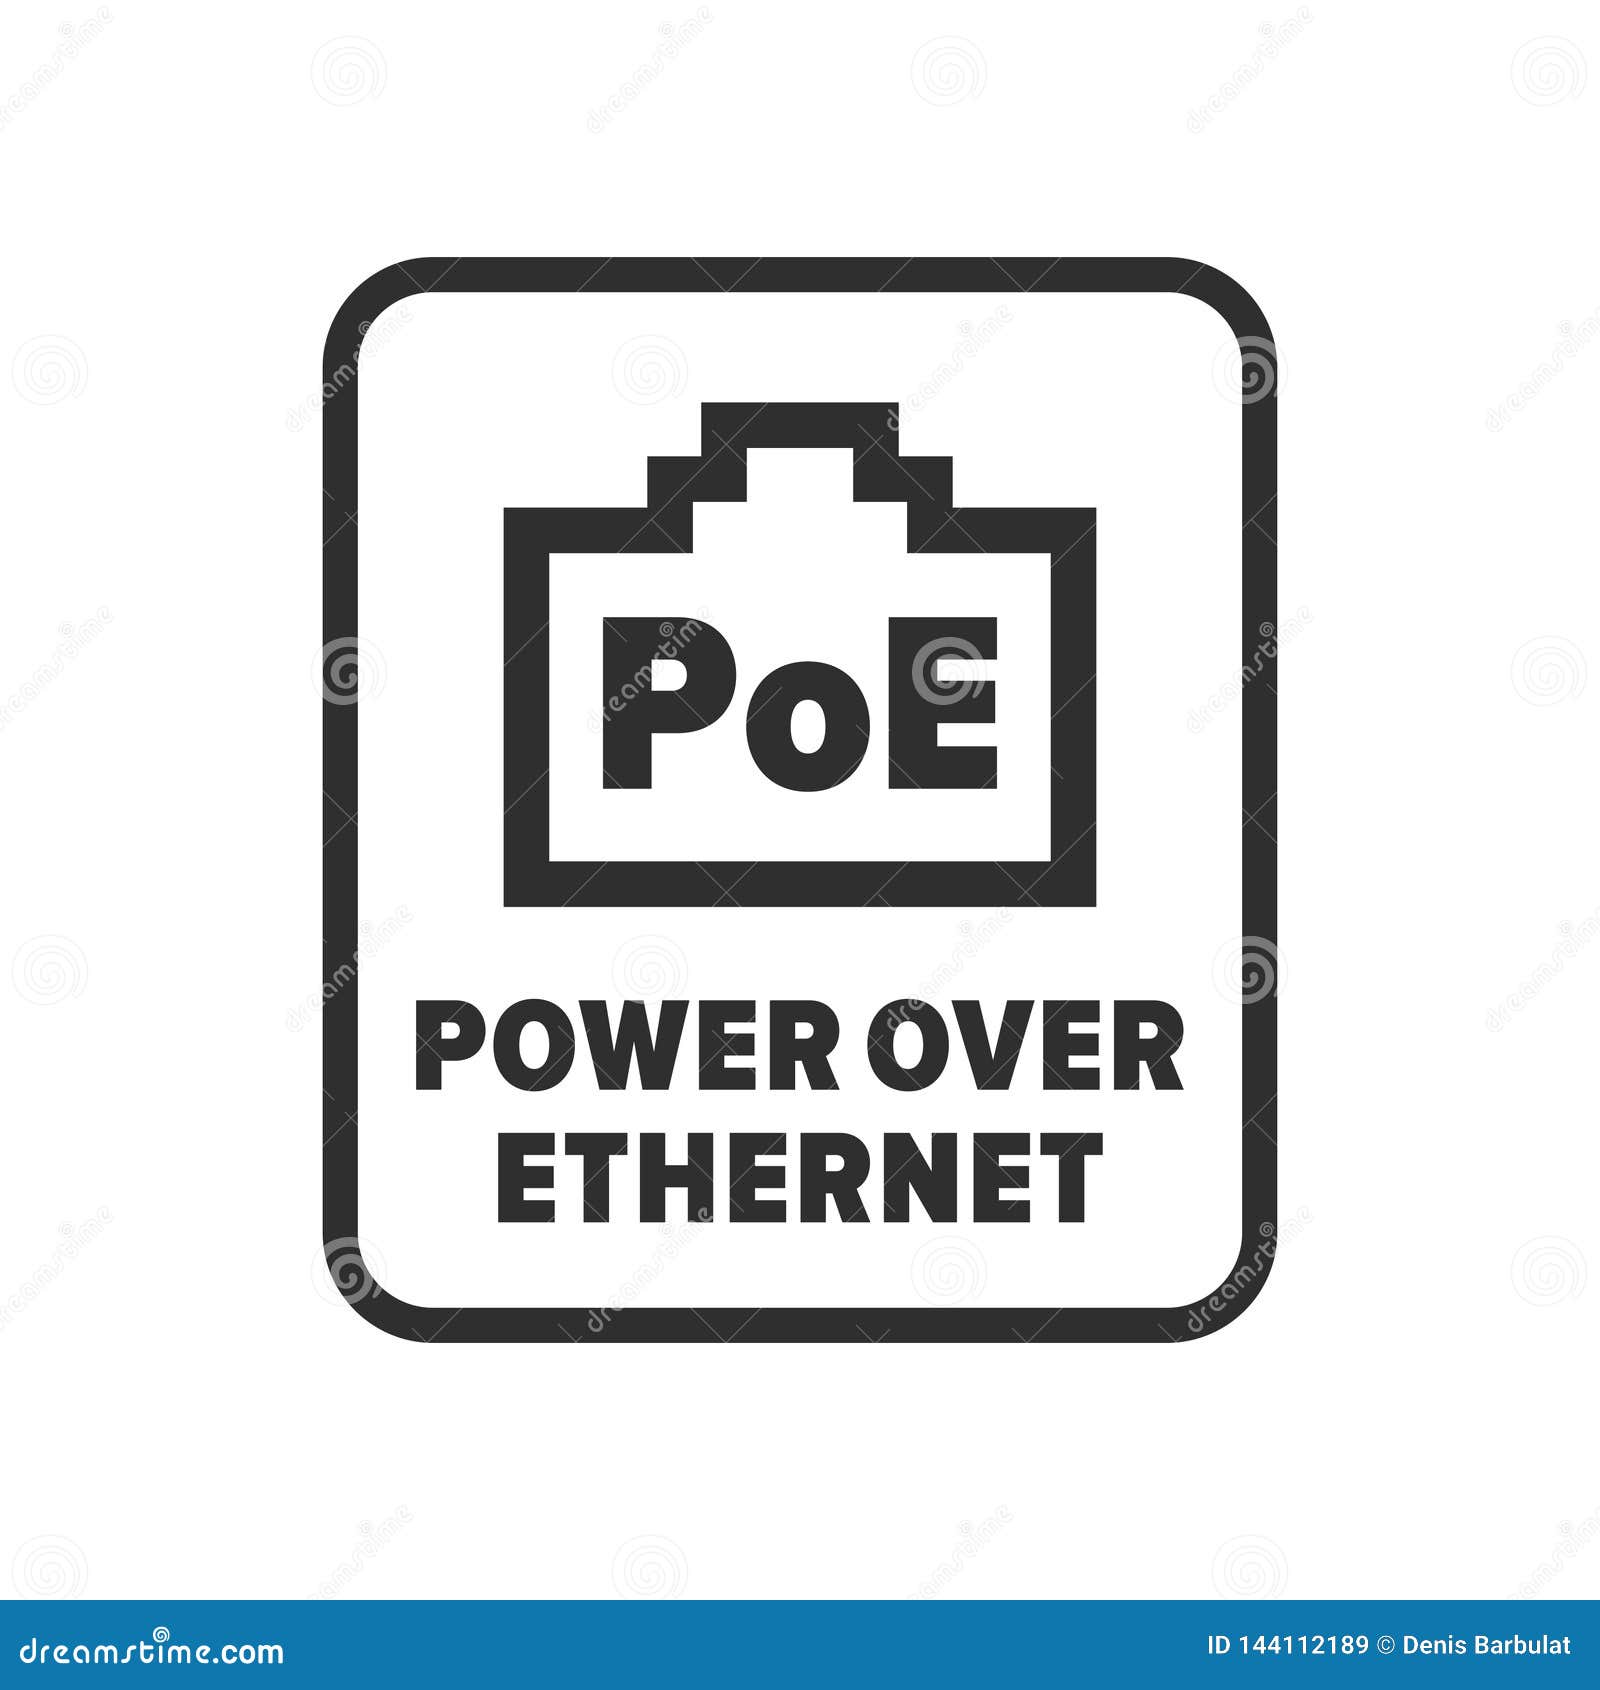 power over ethernet 